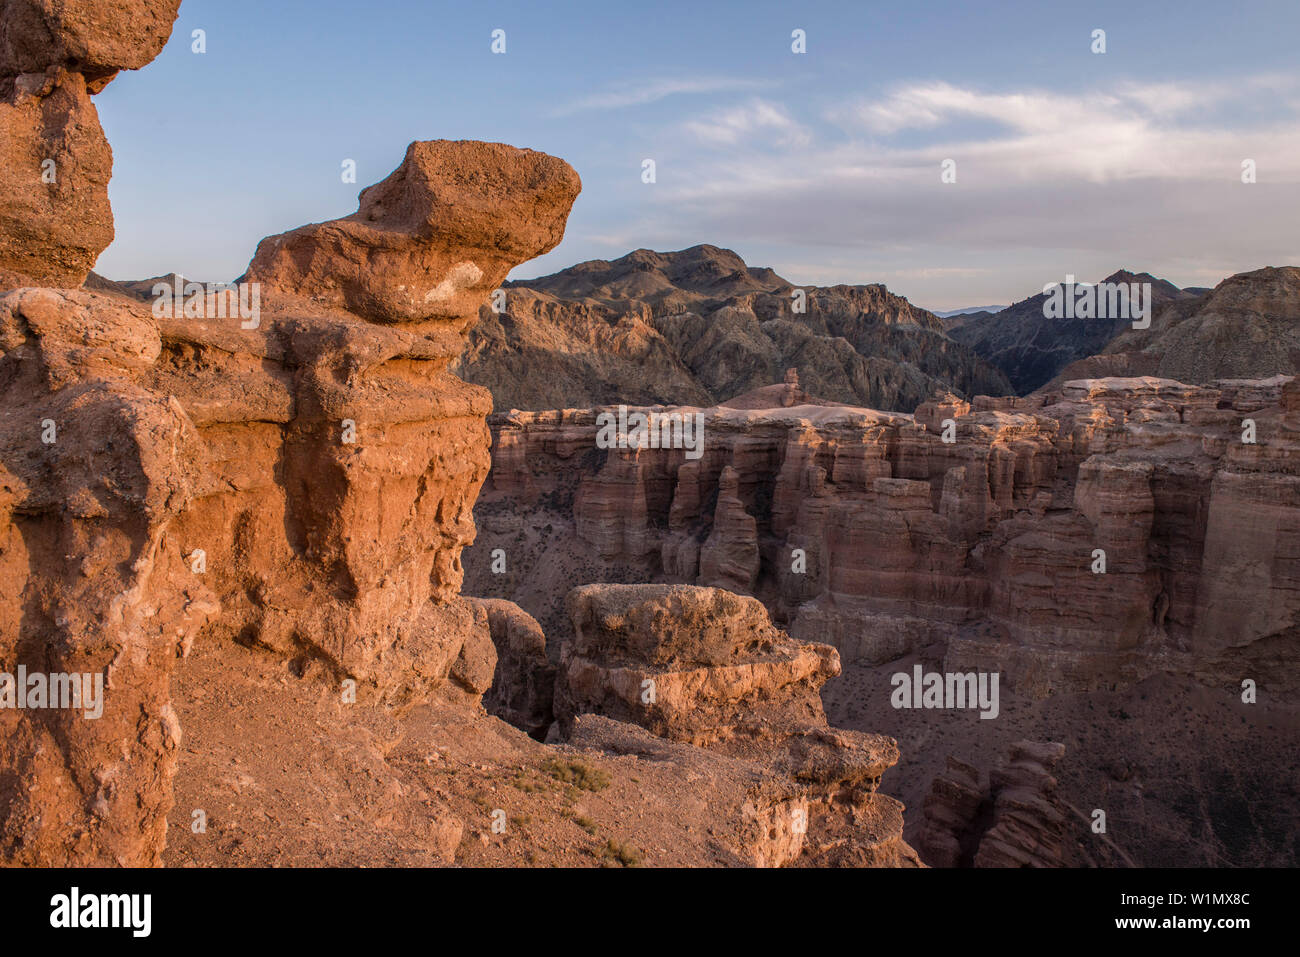 Sandstone formations at Sharyn Canyon, Valley of castles, Sharyn National Park, Almaty region, Kazakhstan, Central Asia, Asia Stock Photo